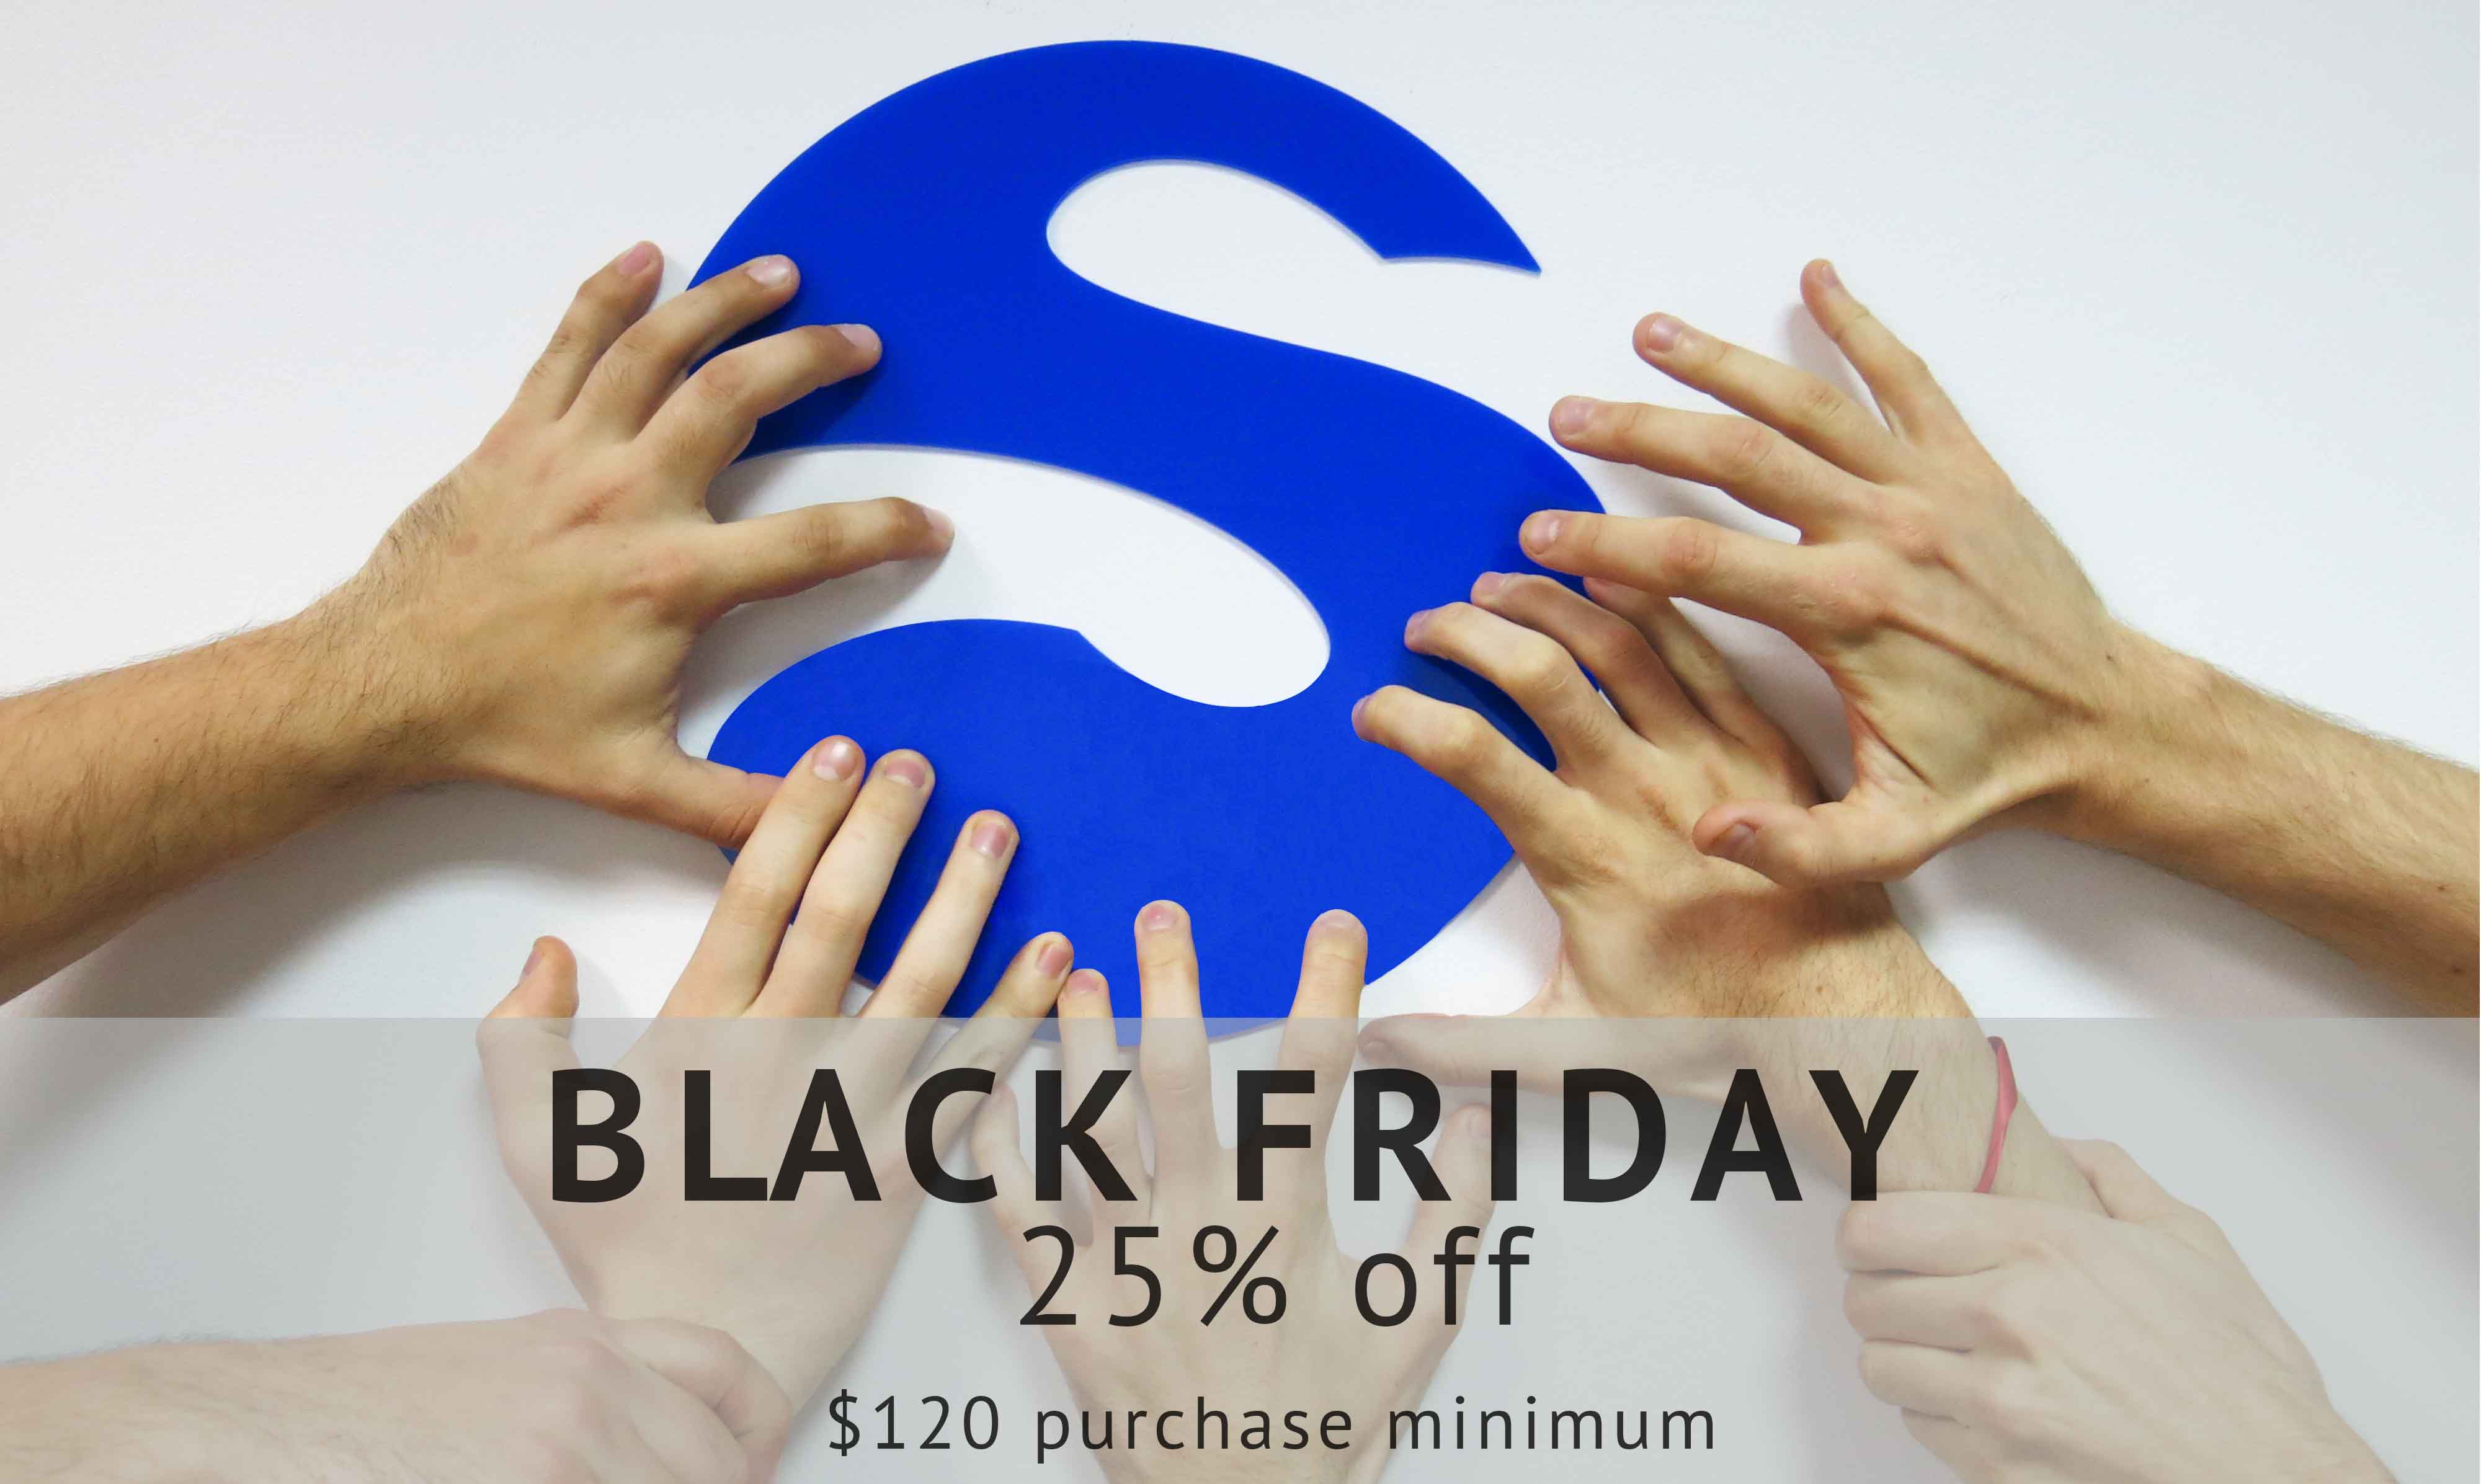 Black Friday: Get 25% Off on All your 3D Prints and Laser Cuts! | Sculpteo Blog